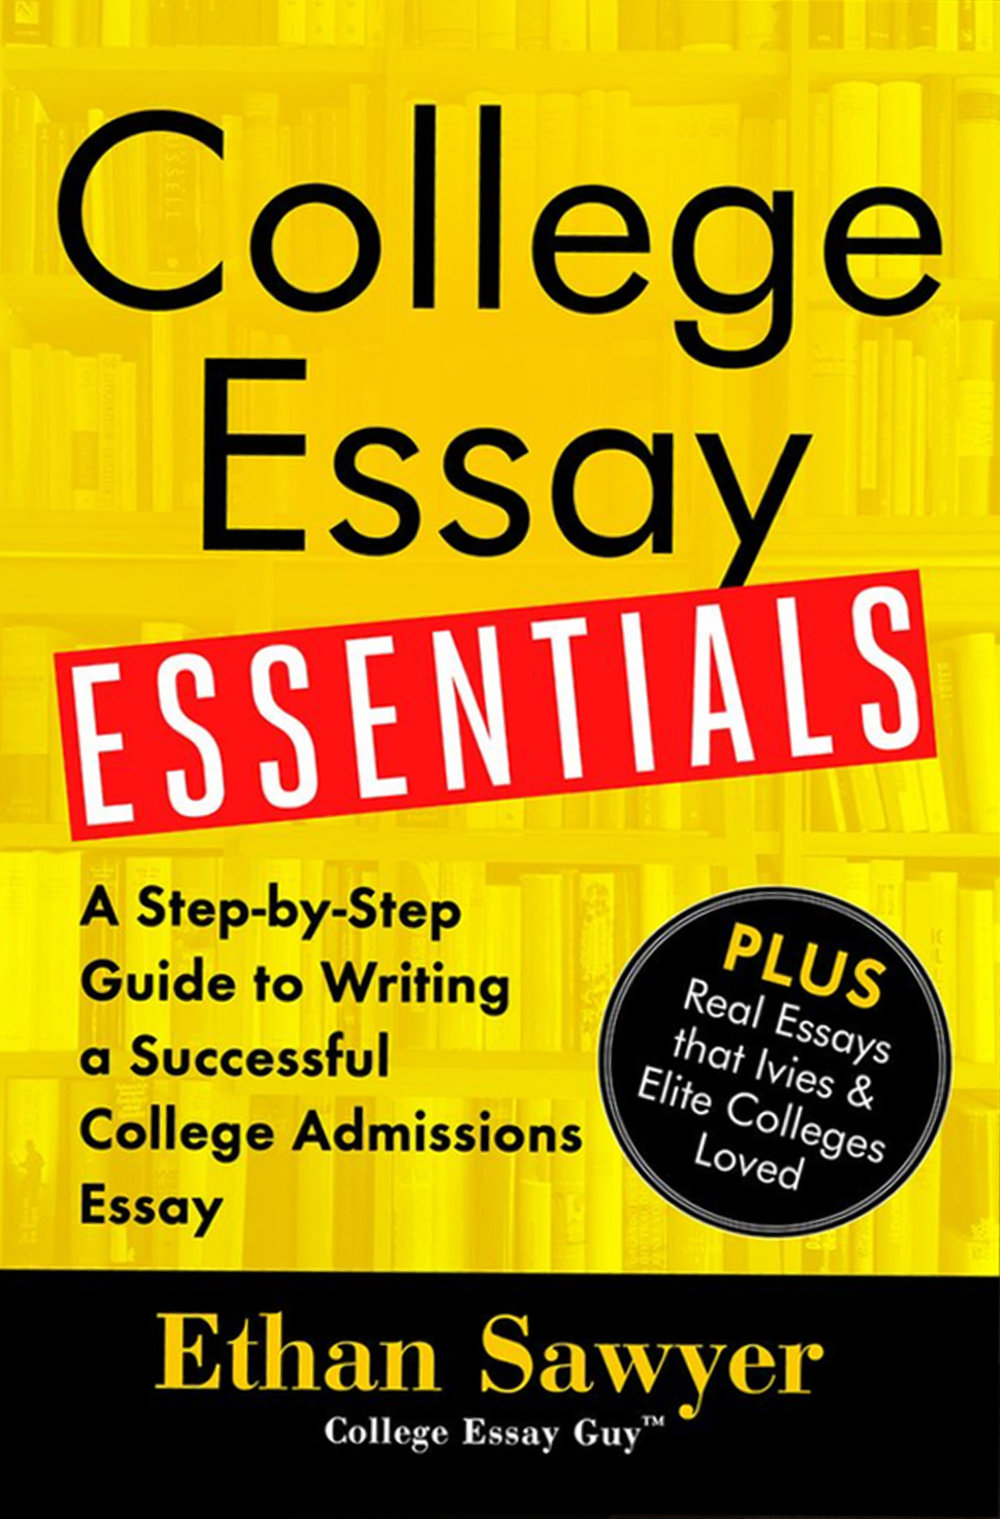 10 Best Essay Writing Books Every Student Needs to Read - Learn ESL